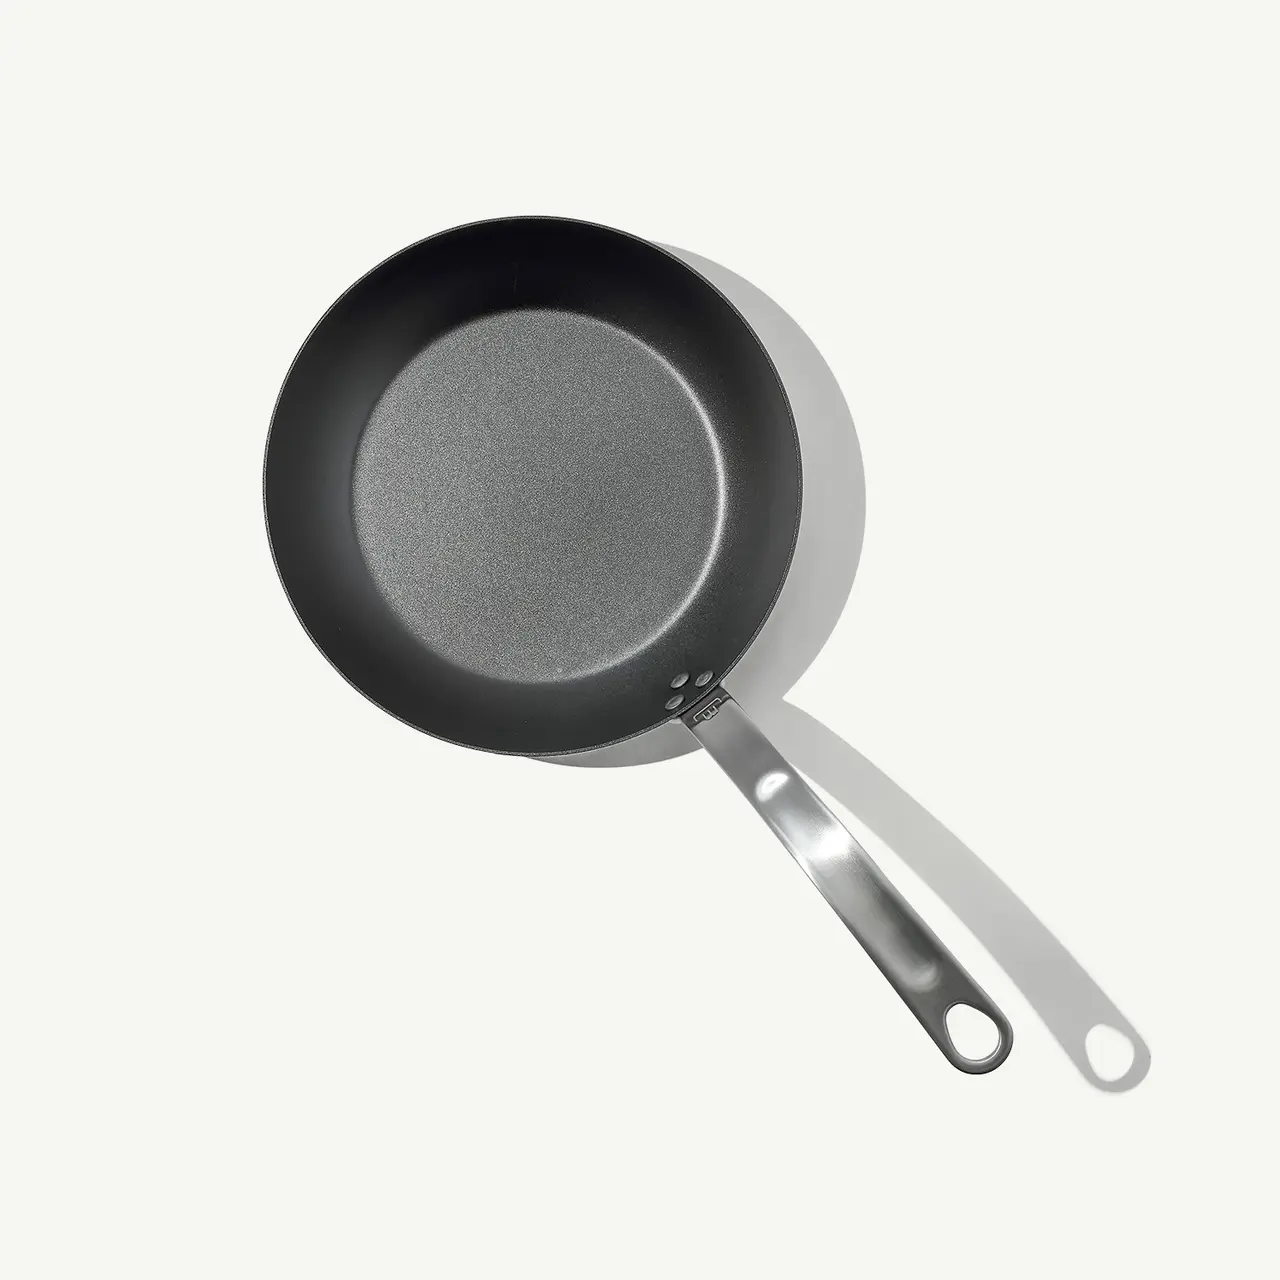 A non-stick frying pan with a silver handle lies against a light gray background.